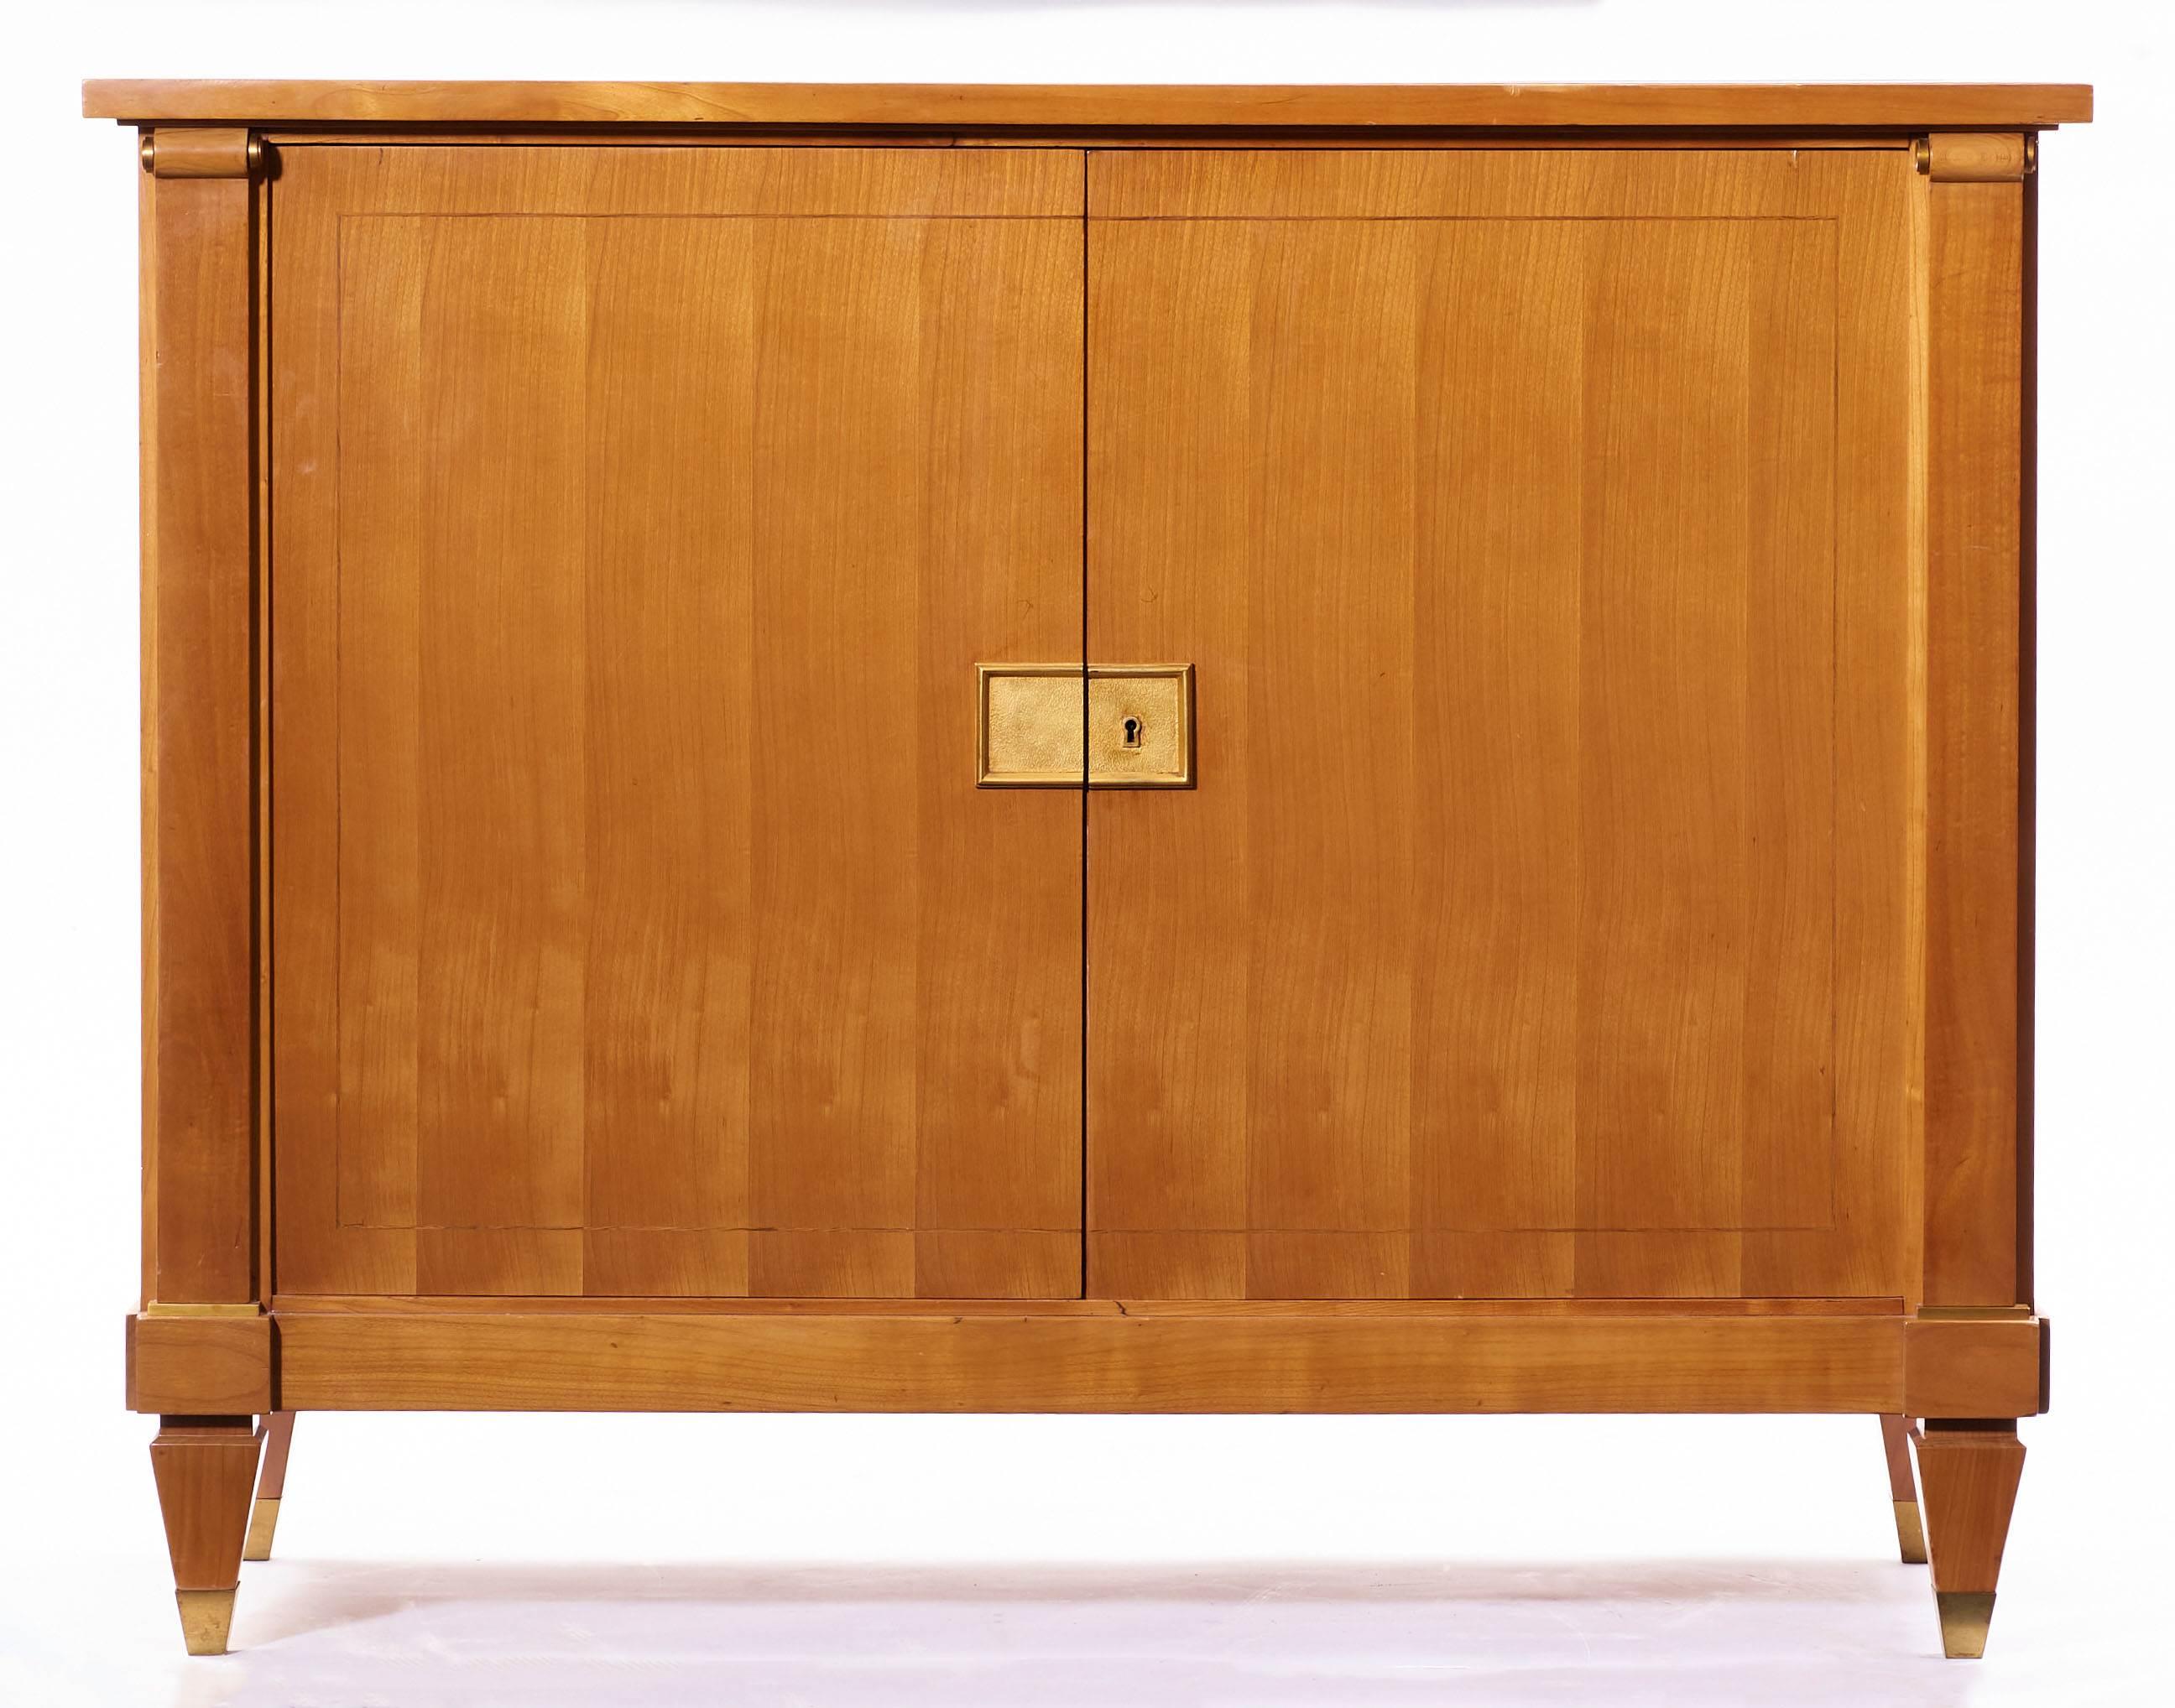 French Art Deco Sideboard / Buffet in Cherrywood by Maurice Rinck In Good Condition For Sale In London, England